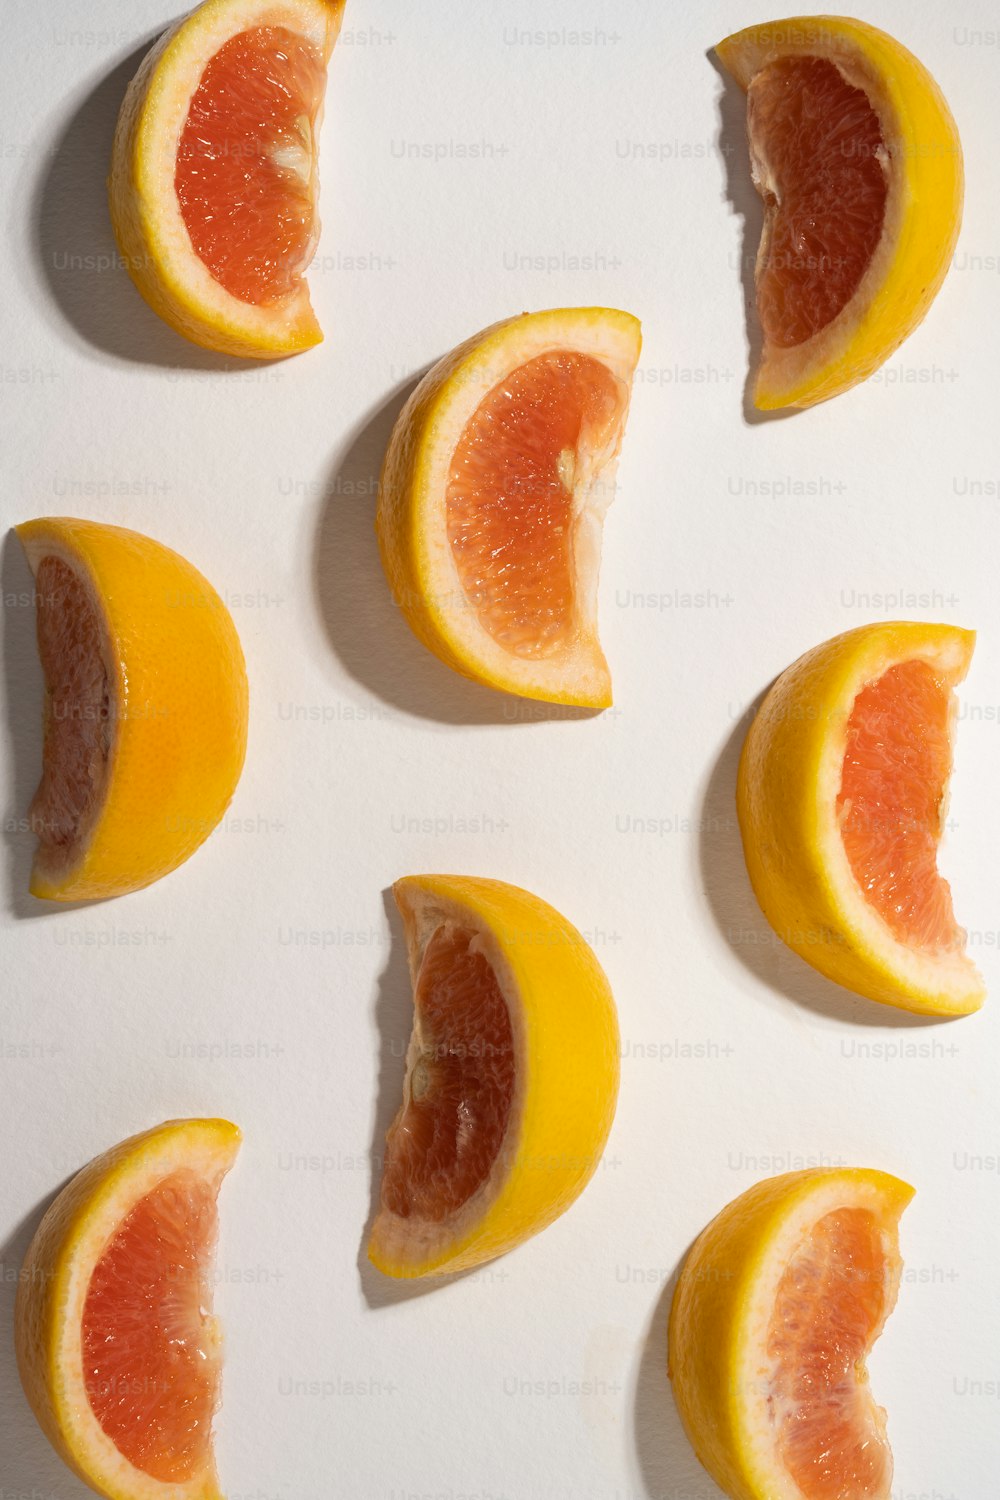 a group of grapefruits cut in half on a white surface